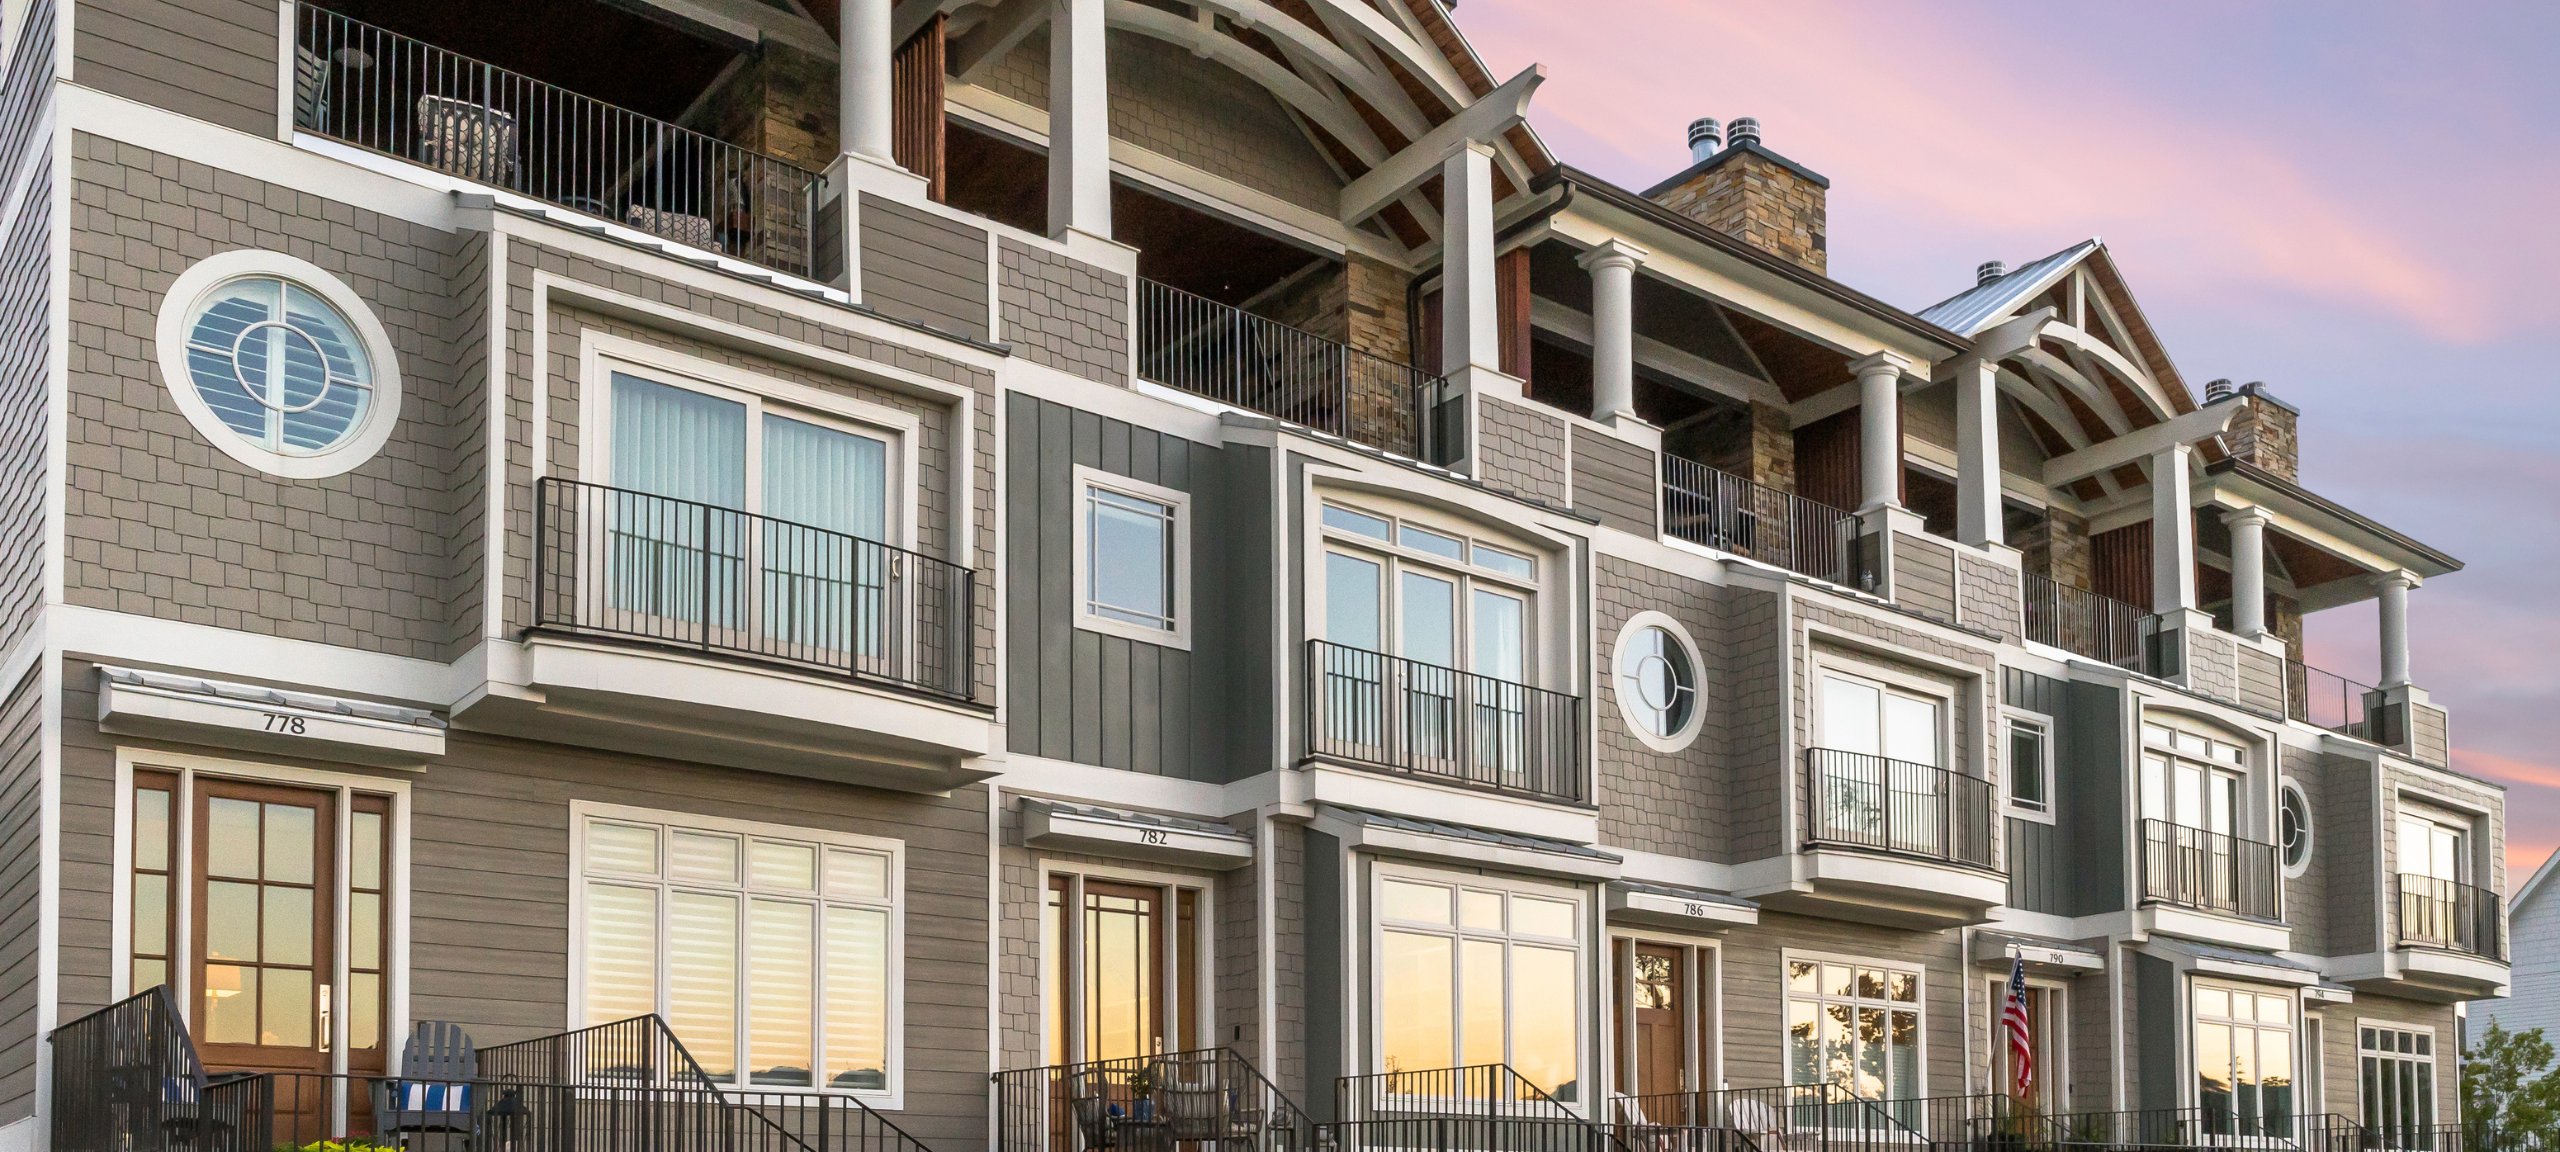 A sunset photo of Cameron Harbor Luxury Townhomes in Chattanooga, TN